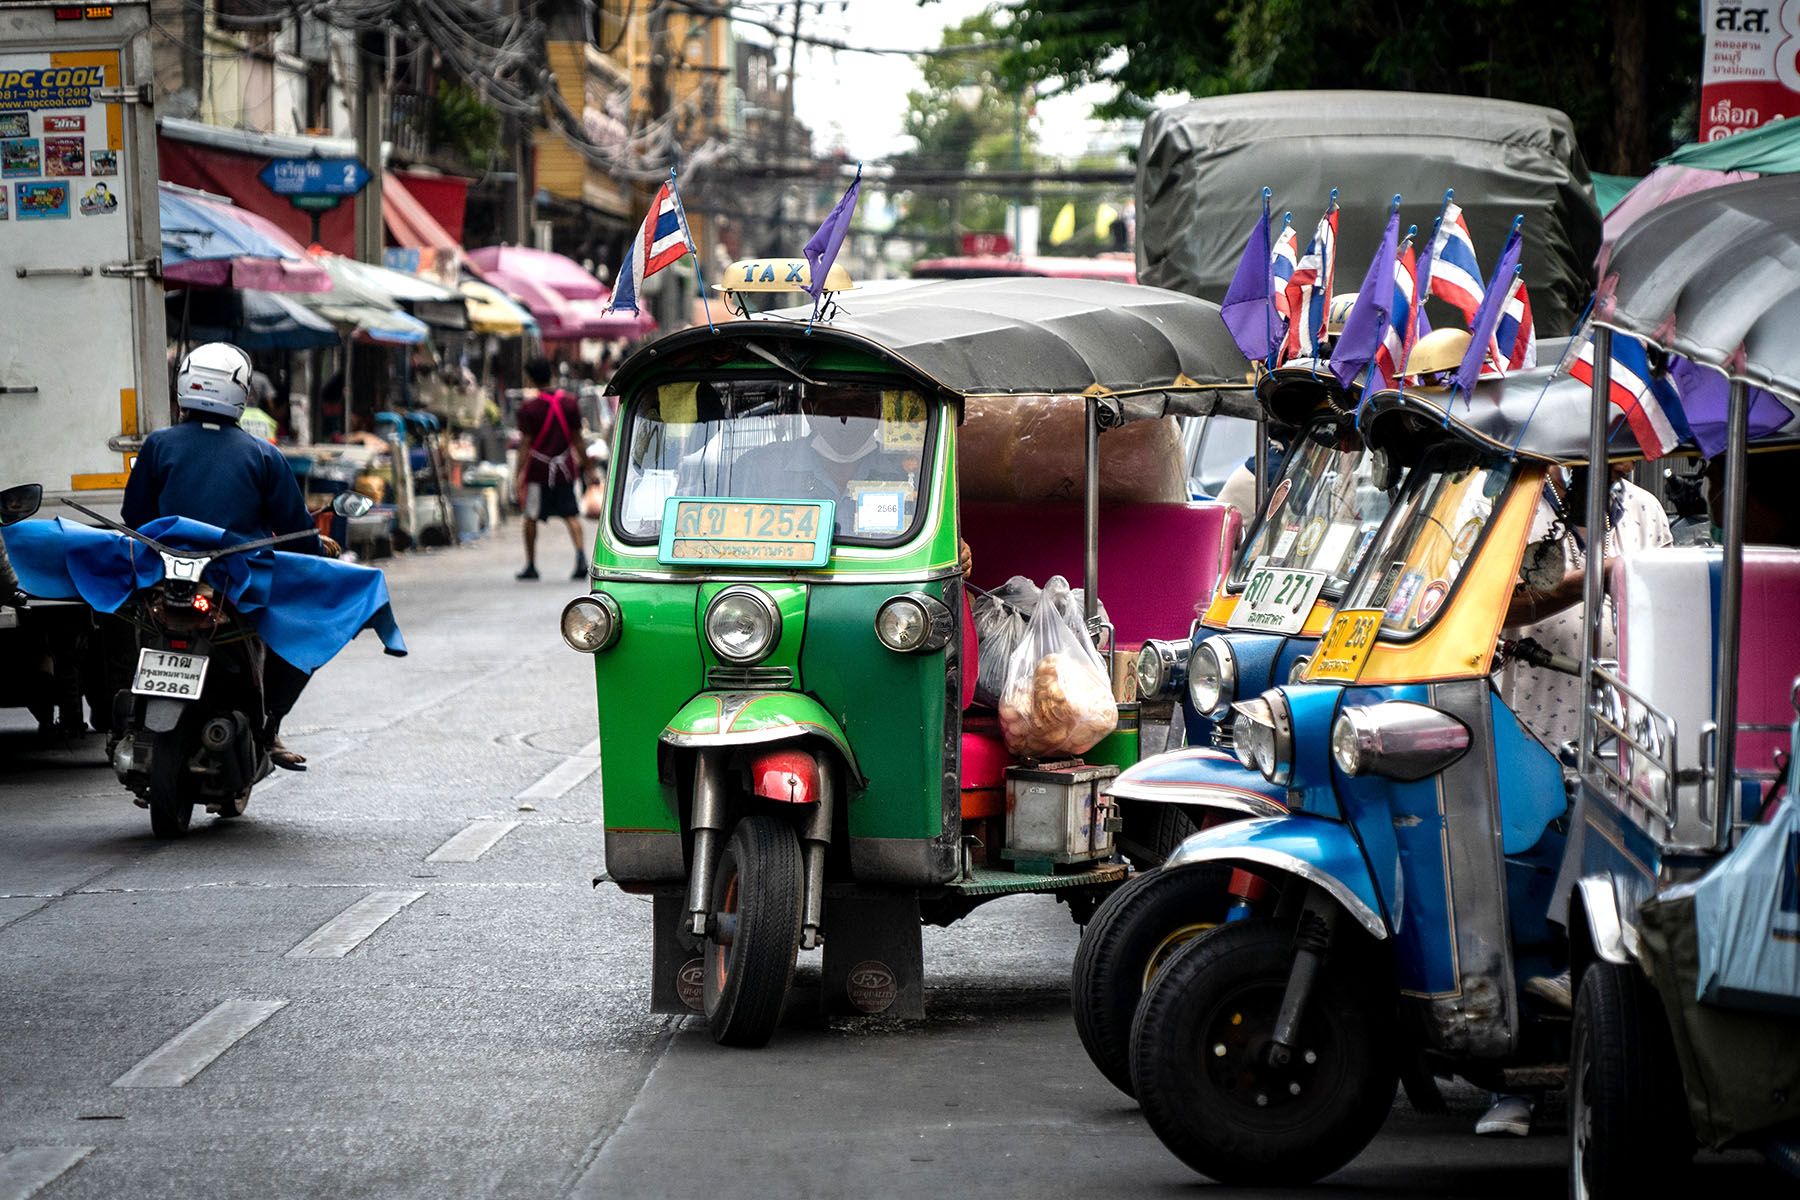 A tuk-tuk carrying loads of bread while leaving the market in Bangkok.